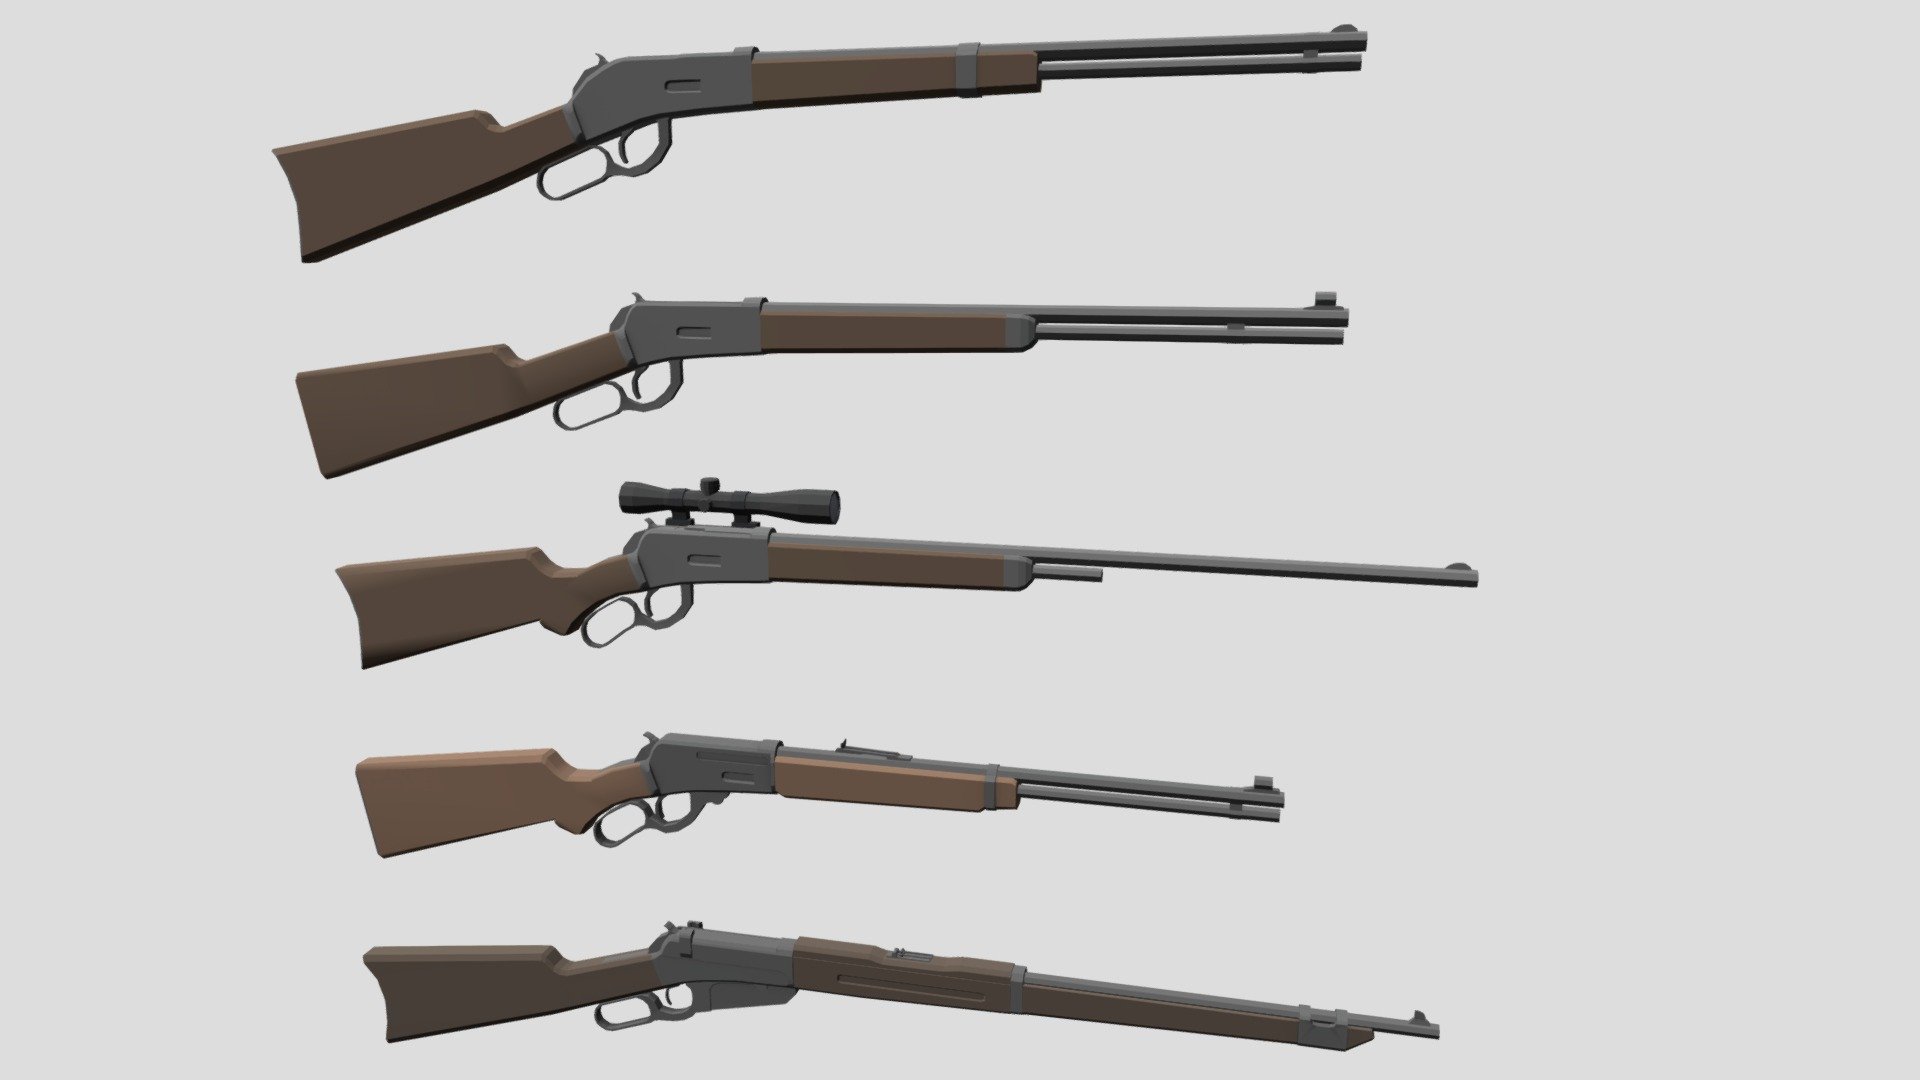 Lever action rifles become popular in the 19th century as weapons that could easily fire multiple rounds before reloading as a major advantage over rifles of the time. They are equally popular in media whether it is being centered on major western settings or as a classic firearm. The weapons displayed here are the Winchester 1873, Winchester 1892, Winchester 1964, Marlin 336, and the Winchester 1895 3d model